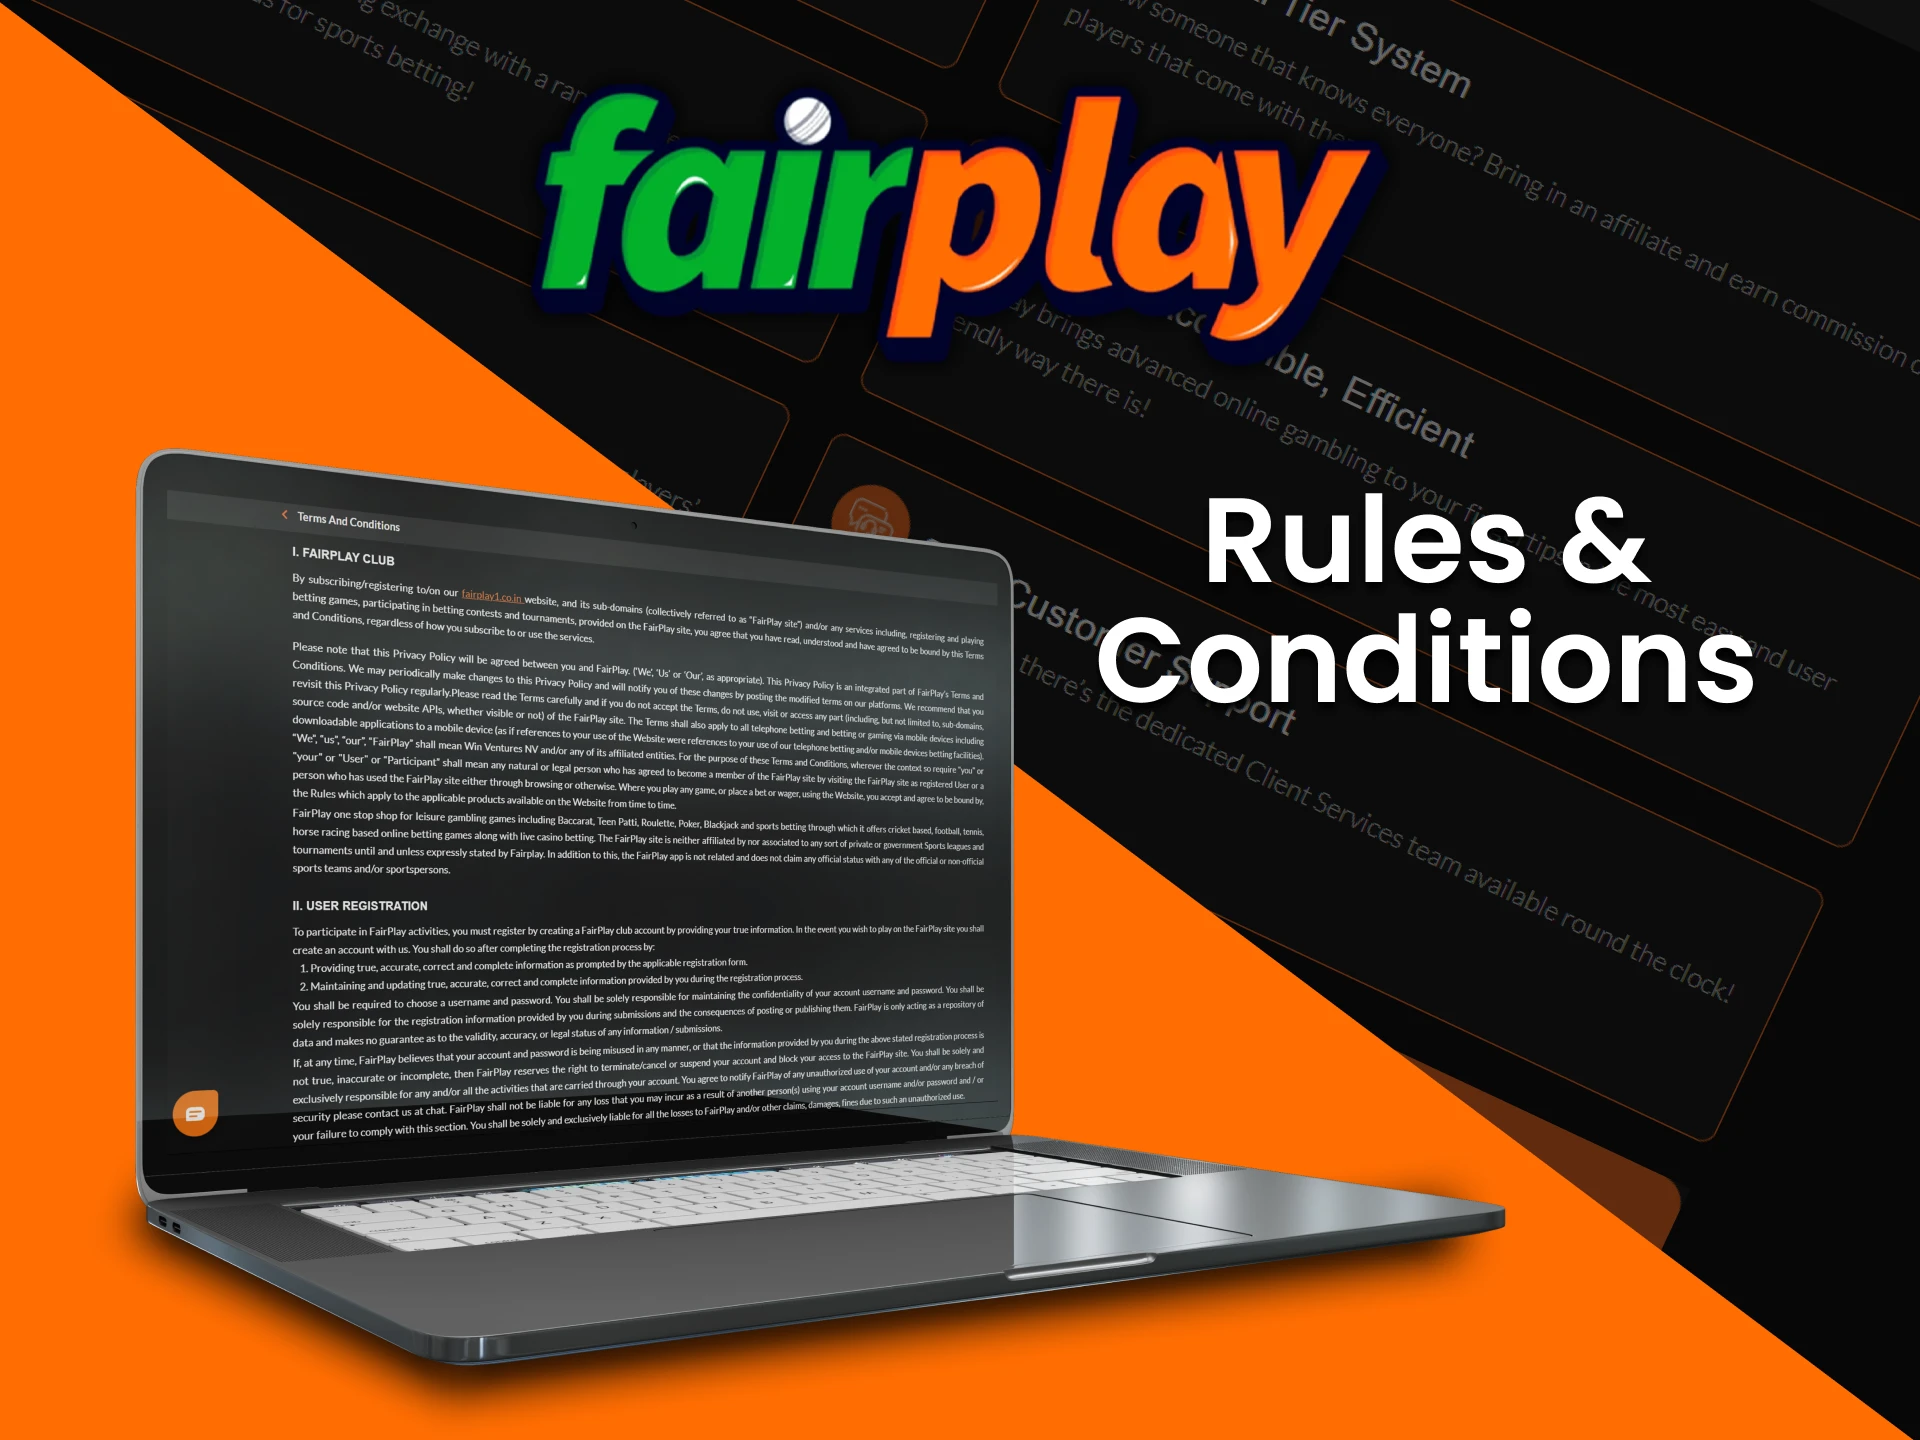 Follow all of the Fairplay affiliate program rules.